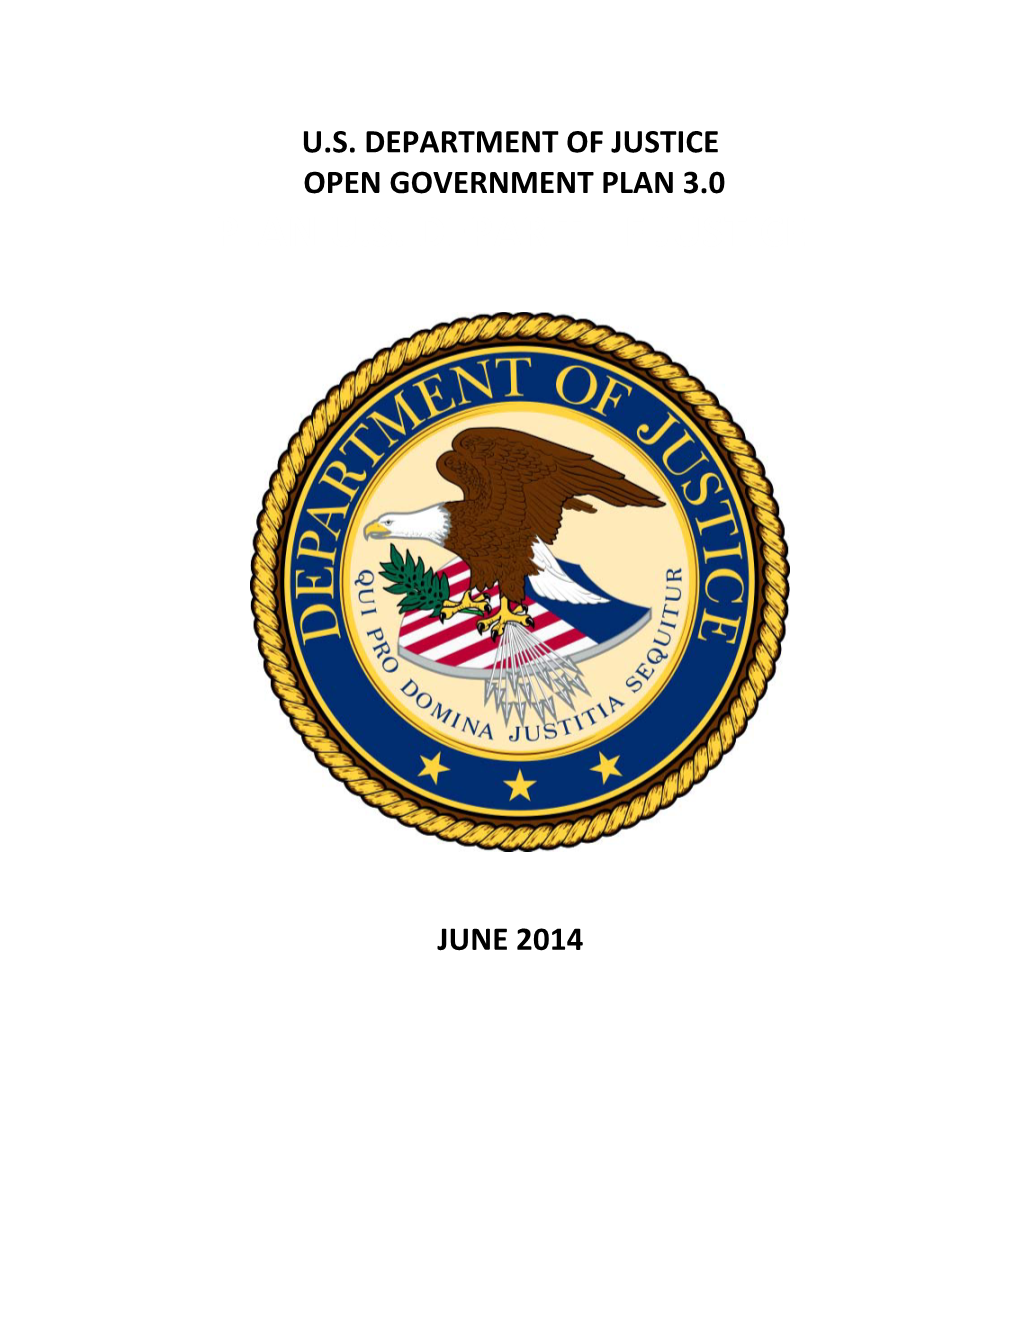 Department's Open Government Plan